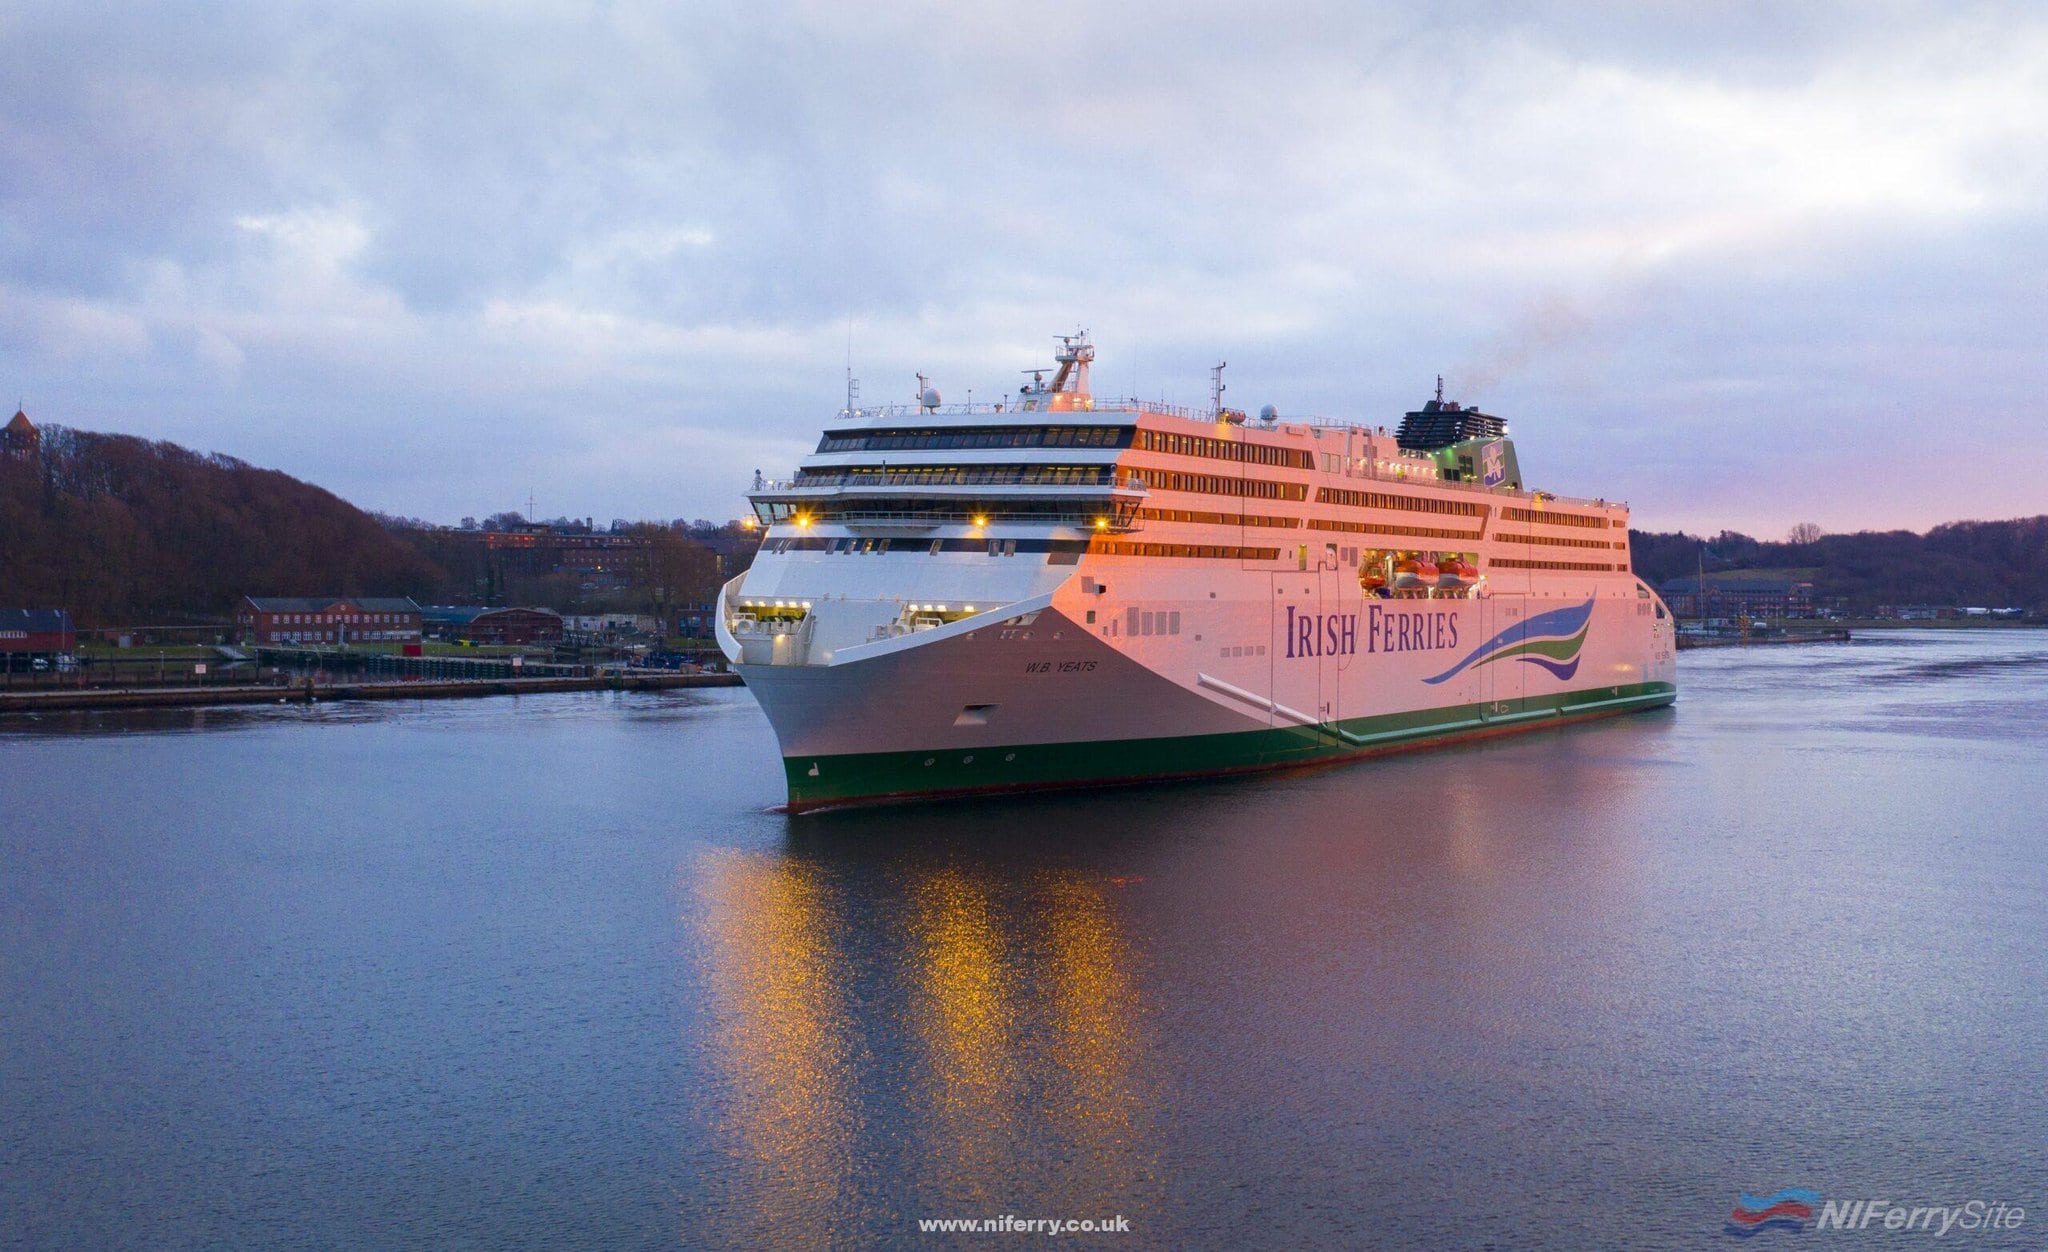 Irish Ferries W.B> YEATS leaving the French port of Cherbourg after her first visit there for berthing trials in December 2018. Irish Ferries.